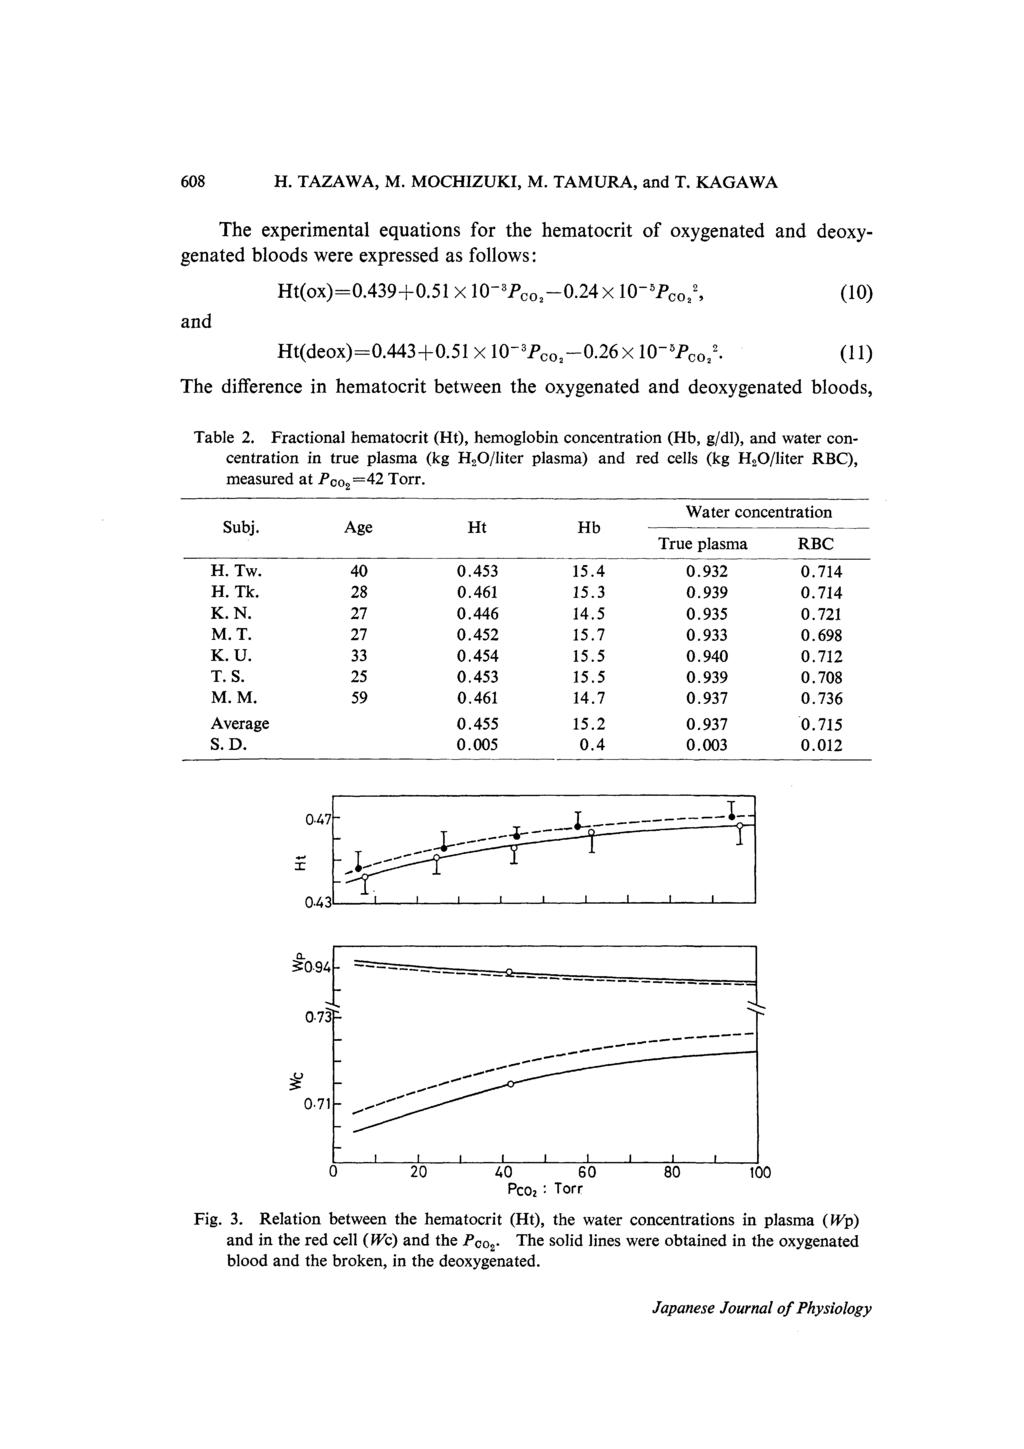 608 H. TAZAWA, M. MOCHIZUKI, M. TAMURA, and T. KAGAWA The experimental equations for the hematocrit of oxygenated and deoxygenated bloods were expressed as follows Ht(ox)=0.439+0.51 x 103P02-0.